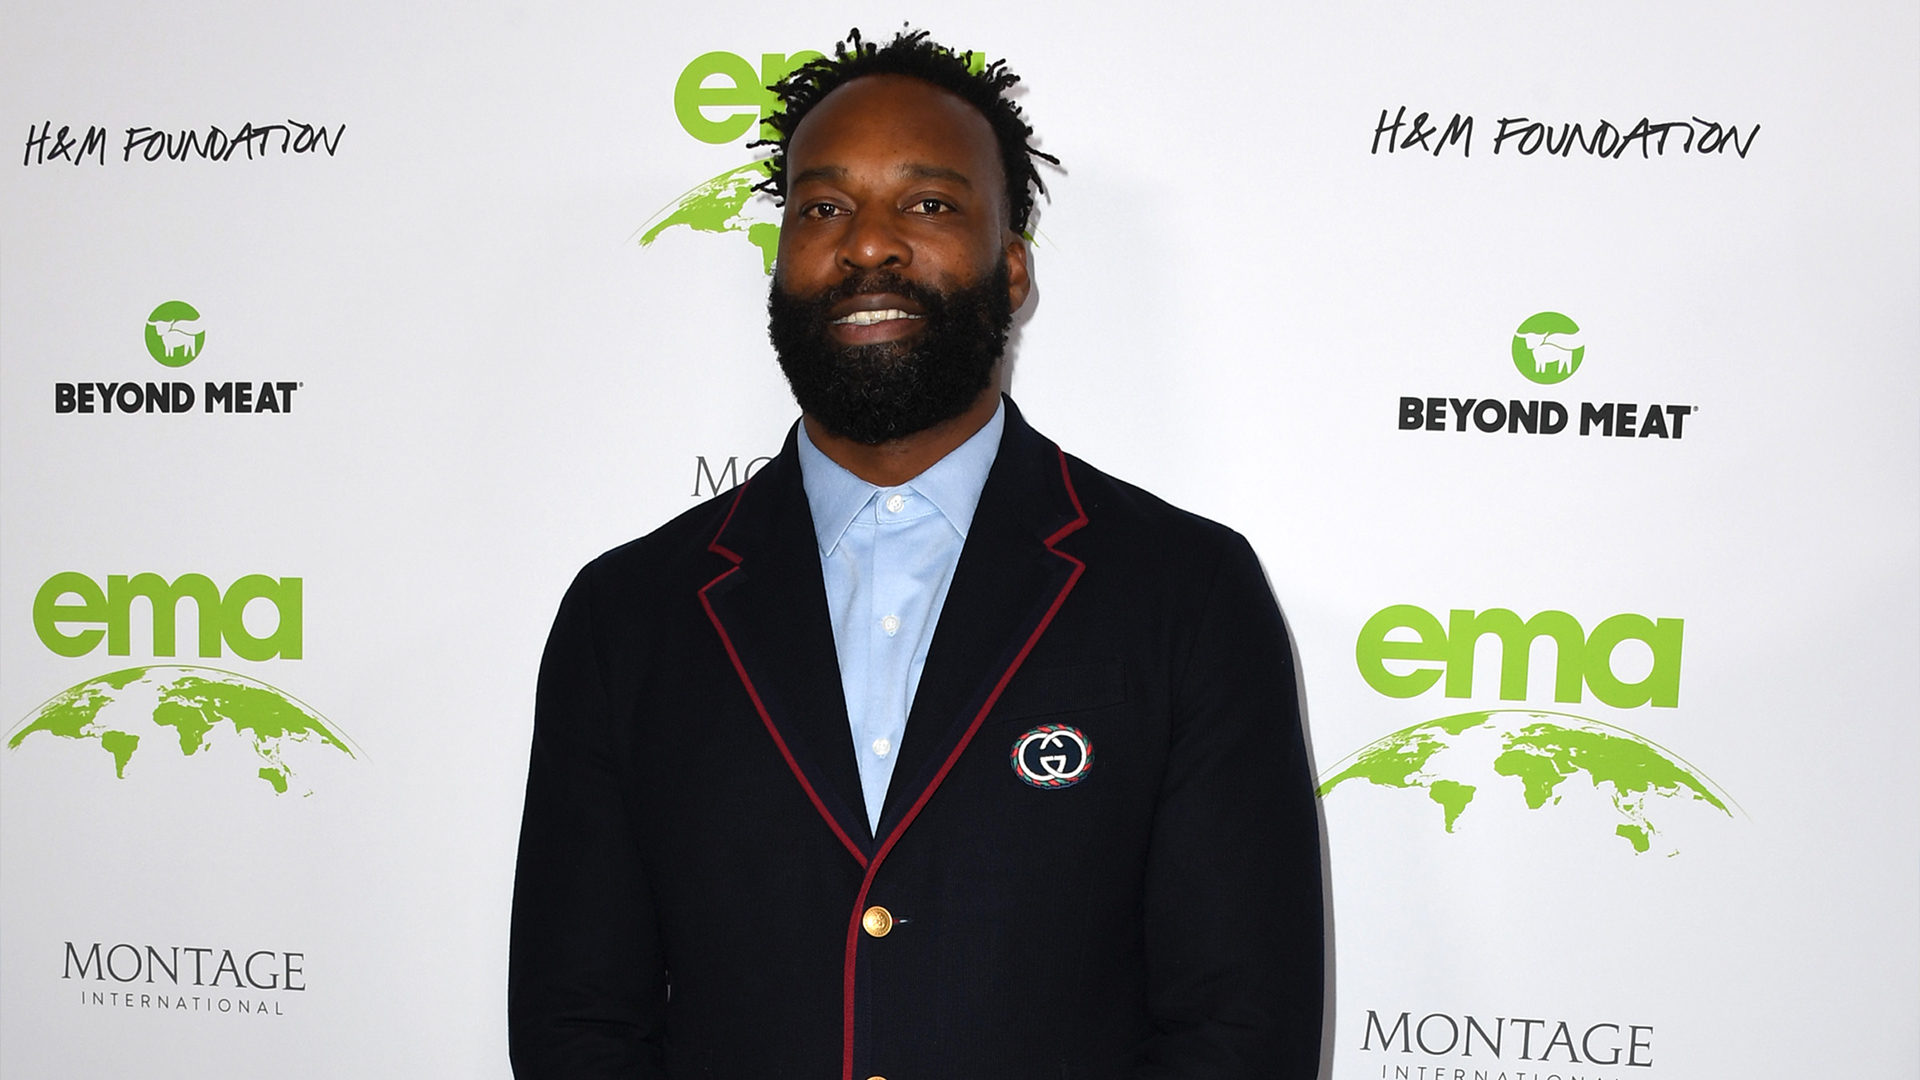 Baron Davis Adds Web3 Venture Playrs To His List Of Business Moves